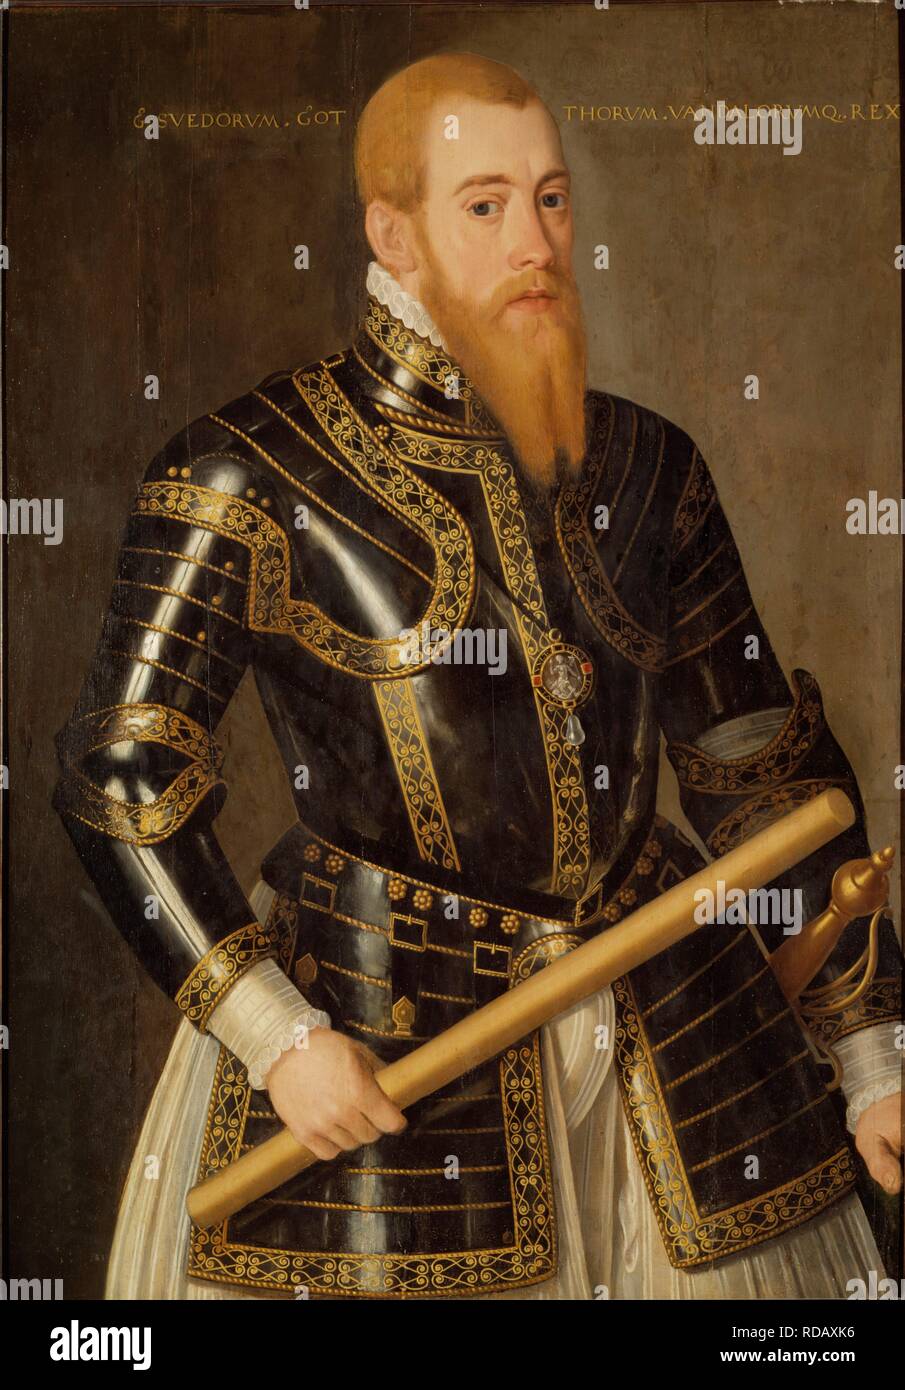 Erik Xiv High Resolution Stock Photography and Images - Alamy